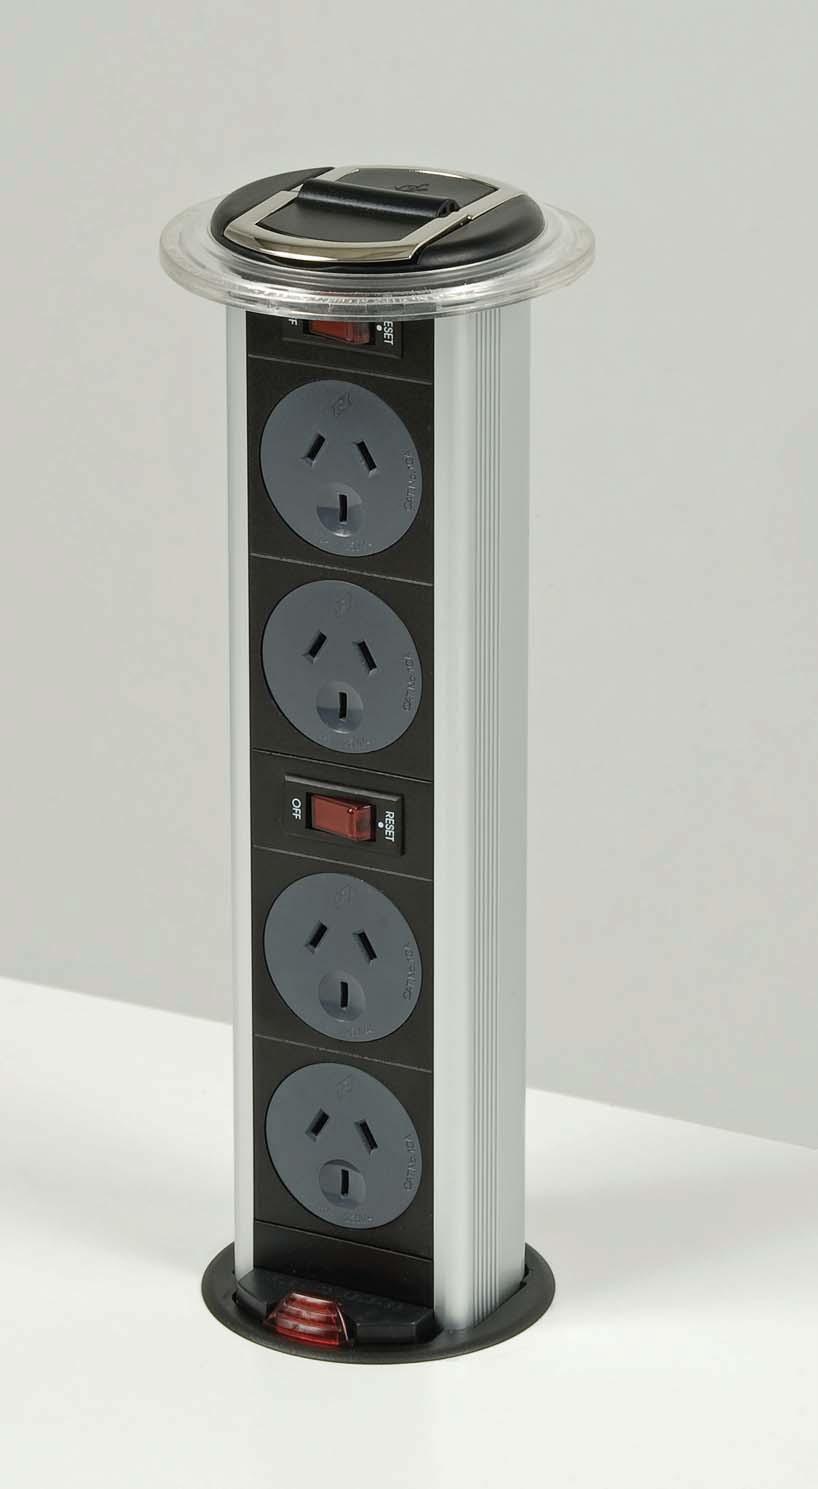 POWERDOCK VERTICAL, FOR OFFICE OR HOME 10 amp,